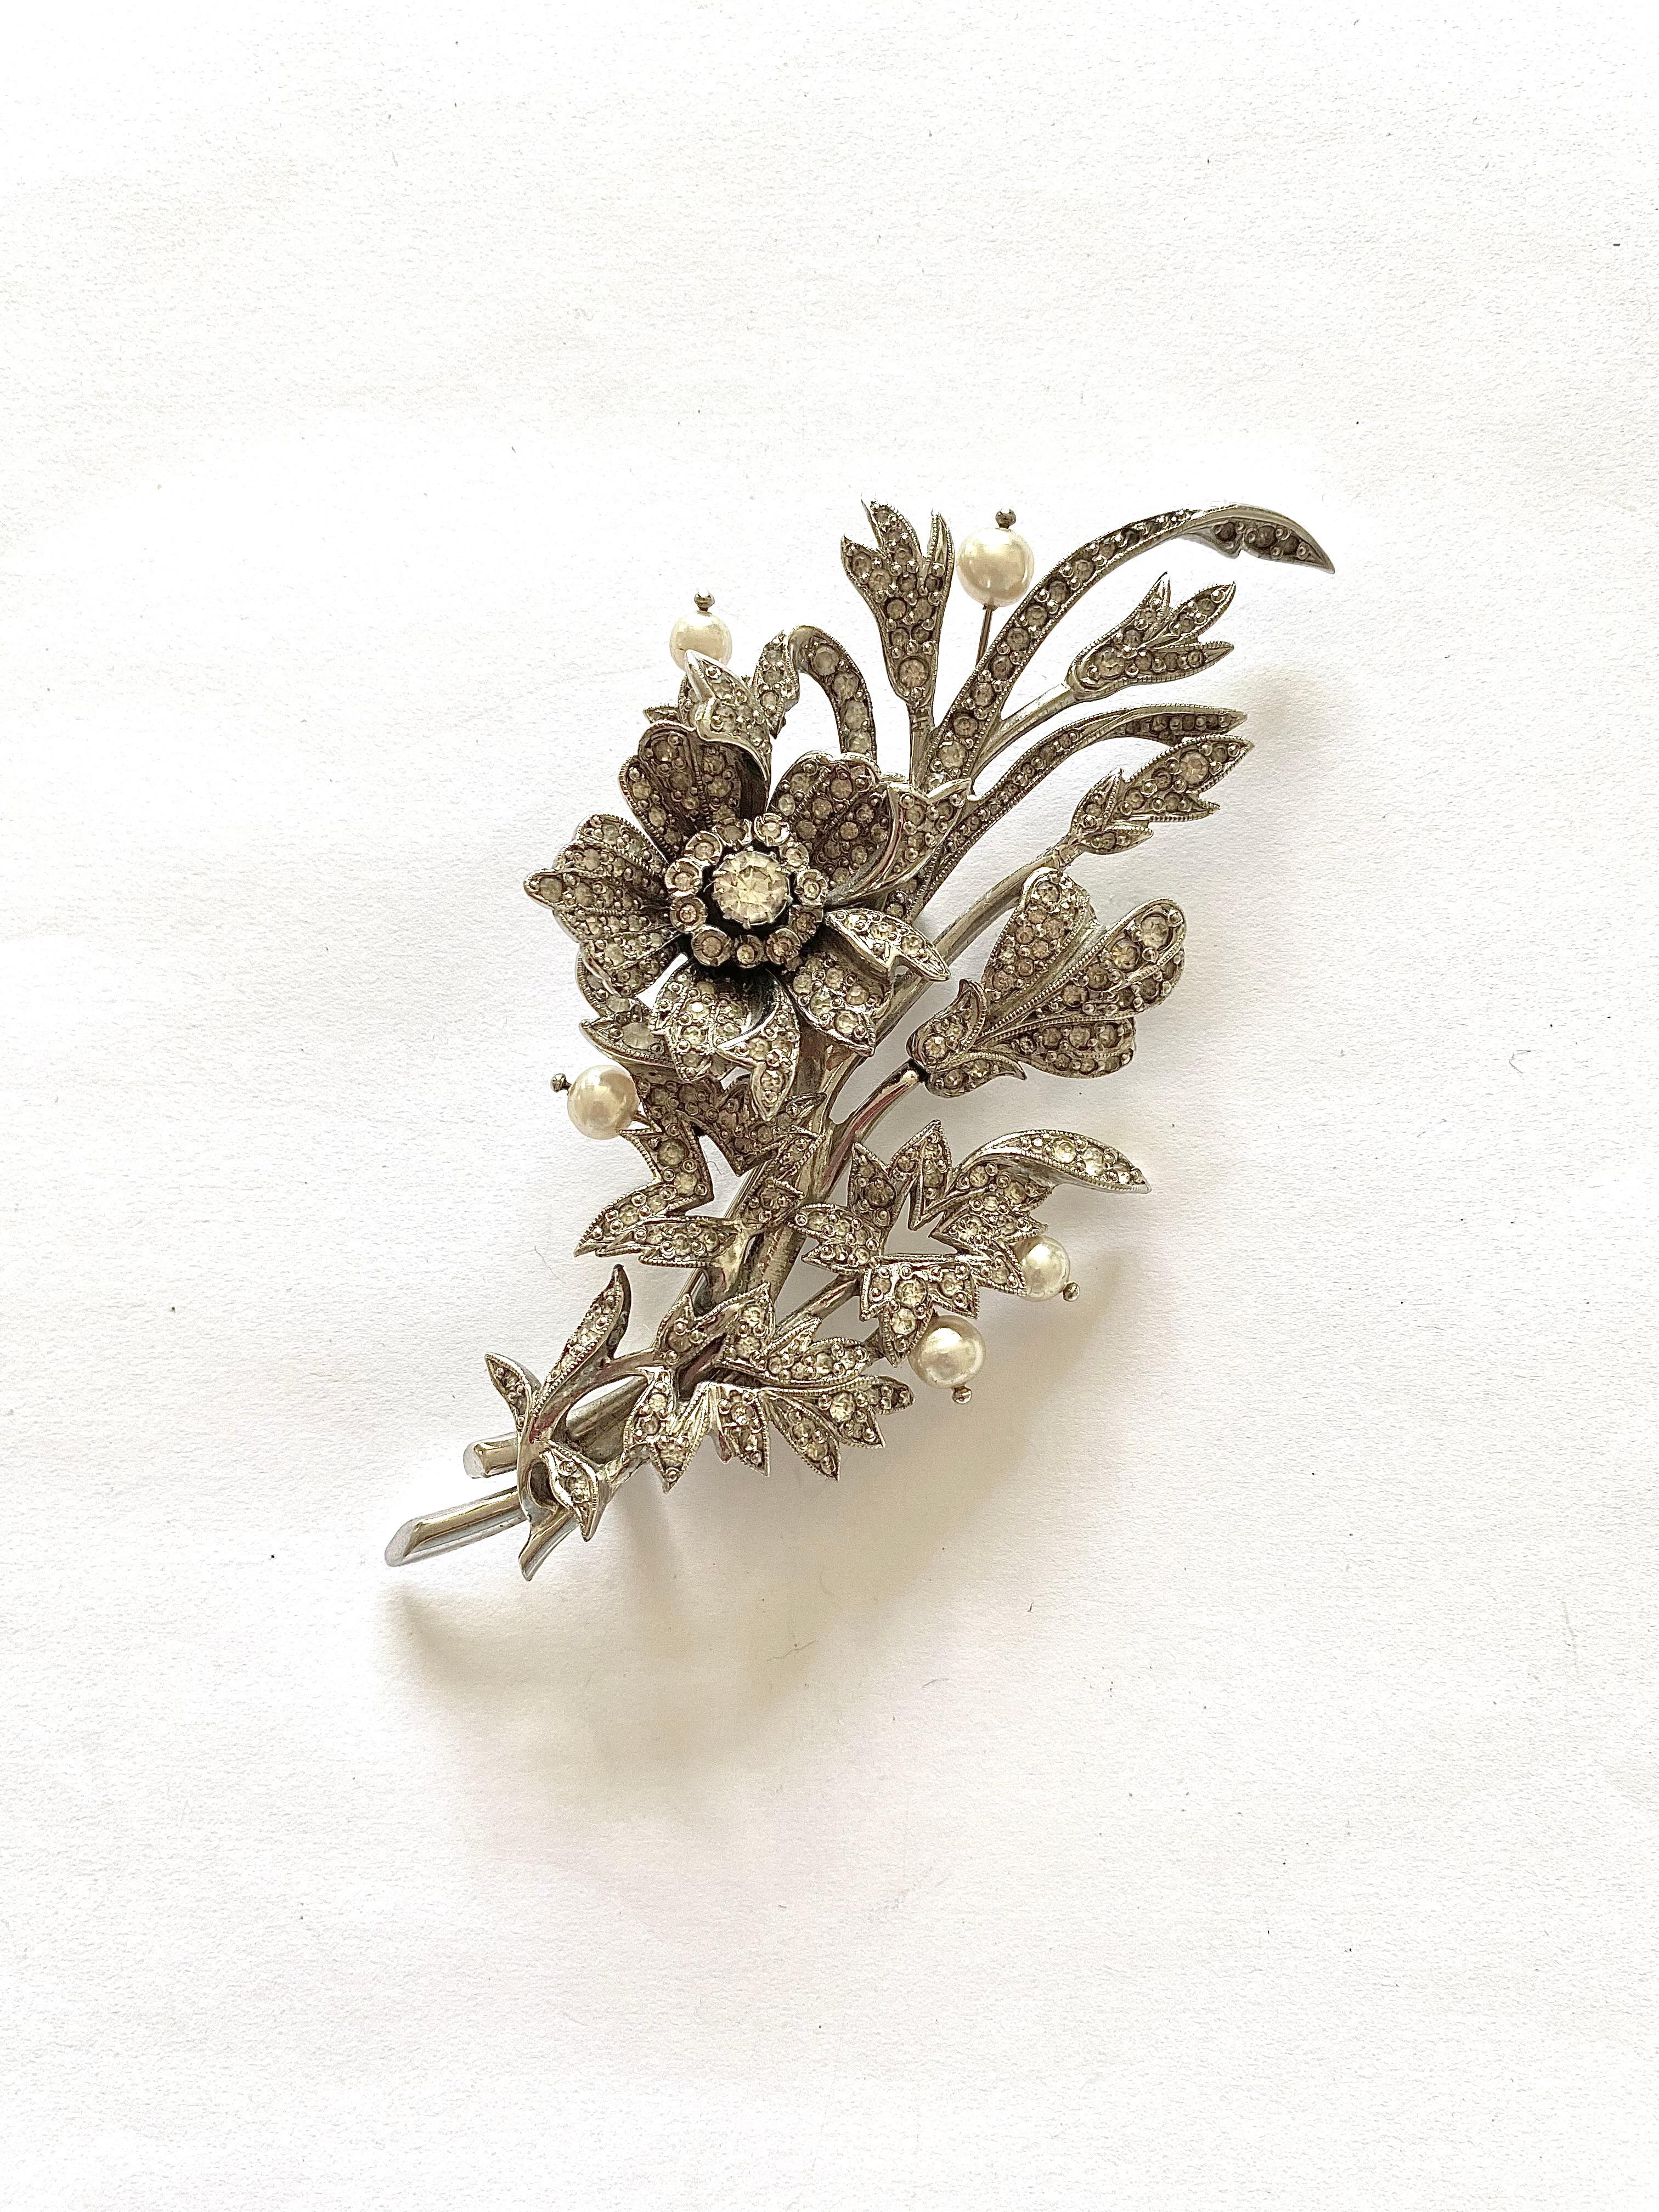 Avery large clear paste 'en tremblant' brooch, Christian Dior/Mitchel Maer c1954 In Excellent Condition For Sale In Greyabbey, County Down